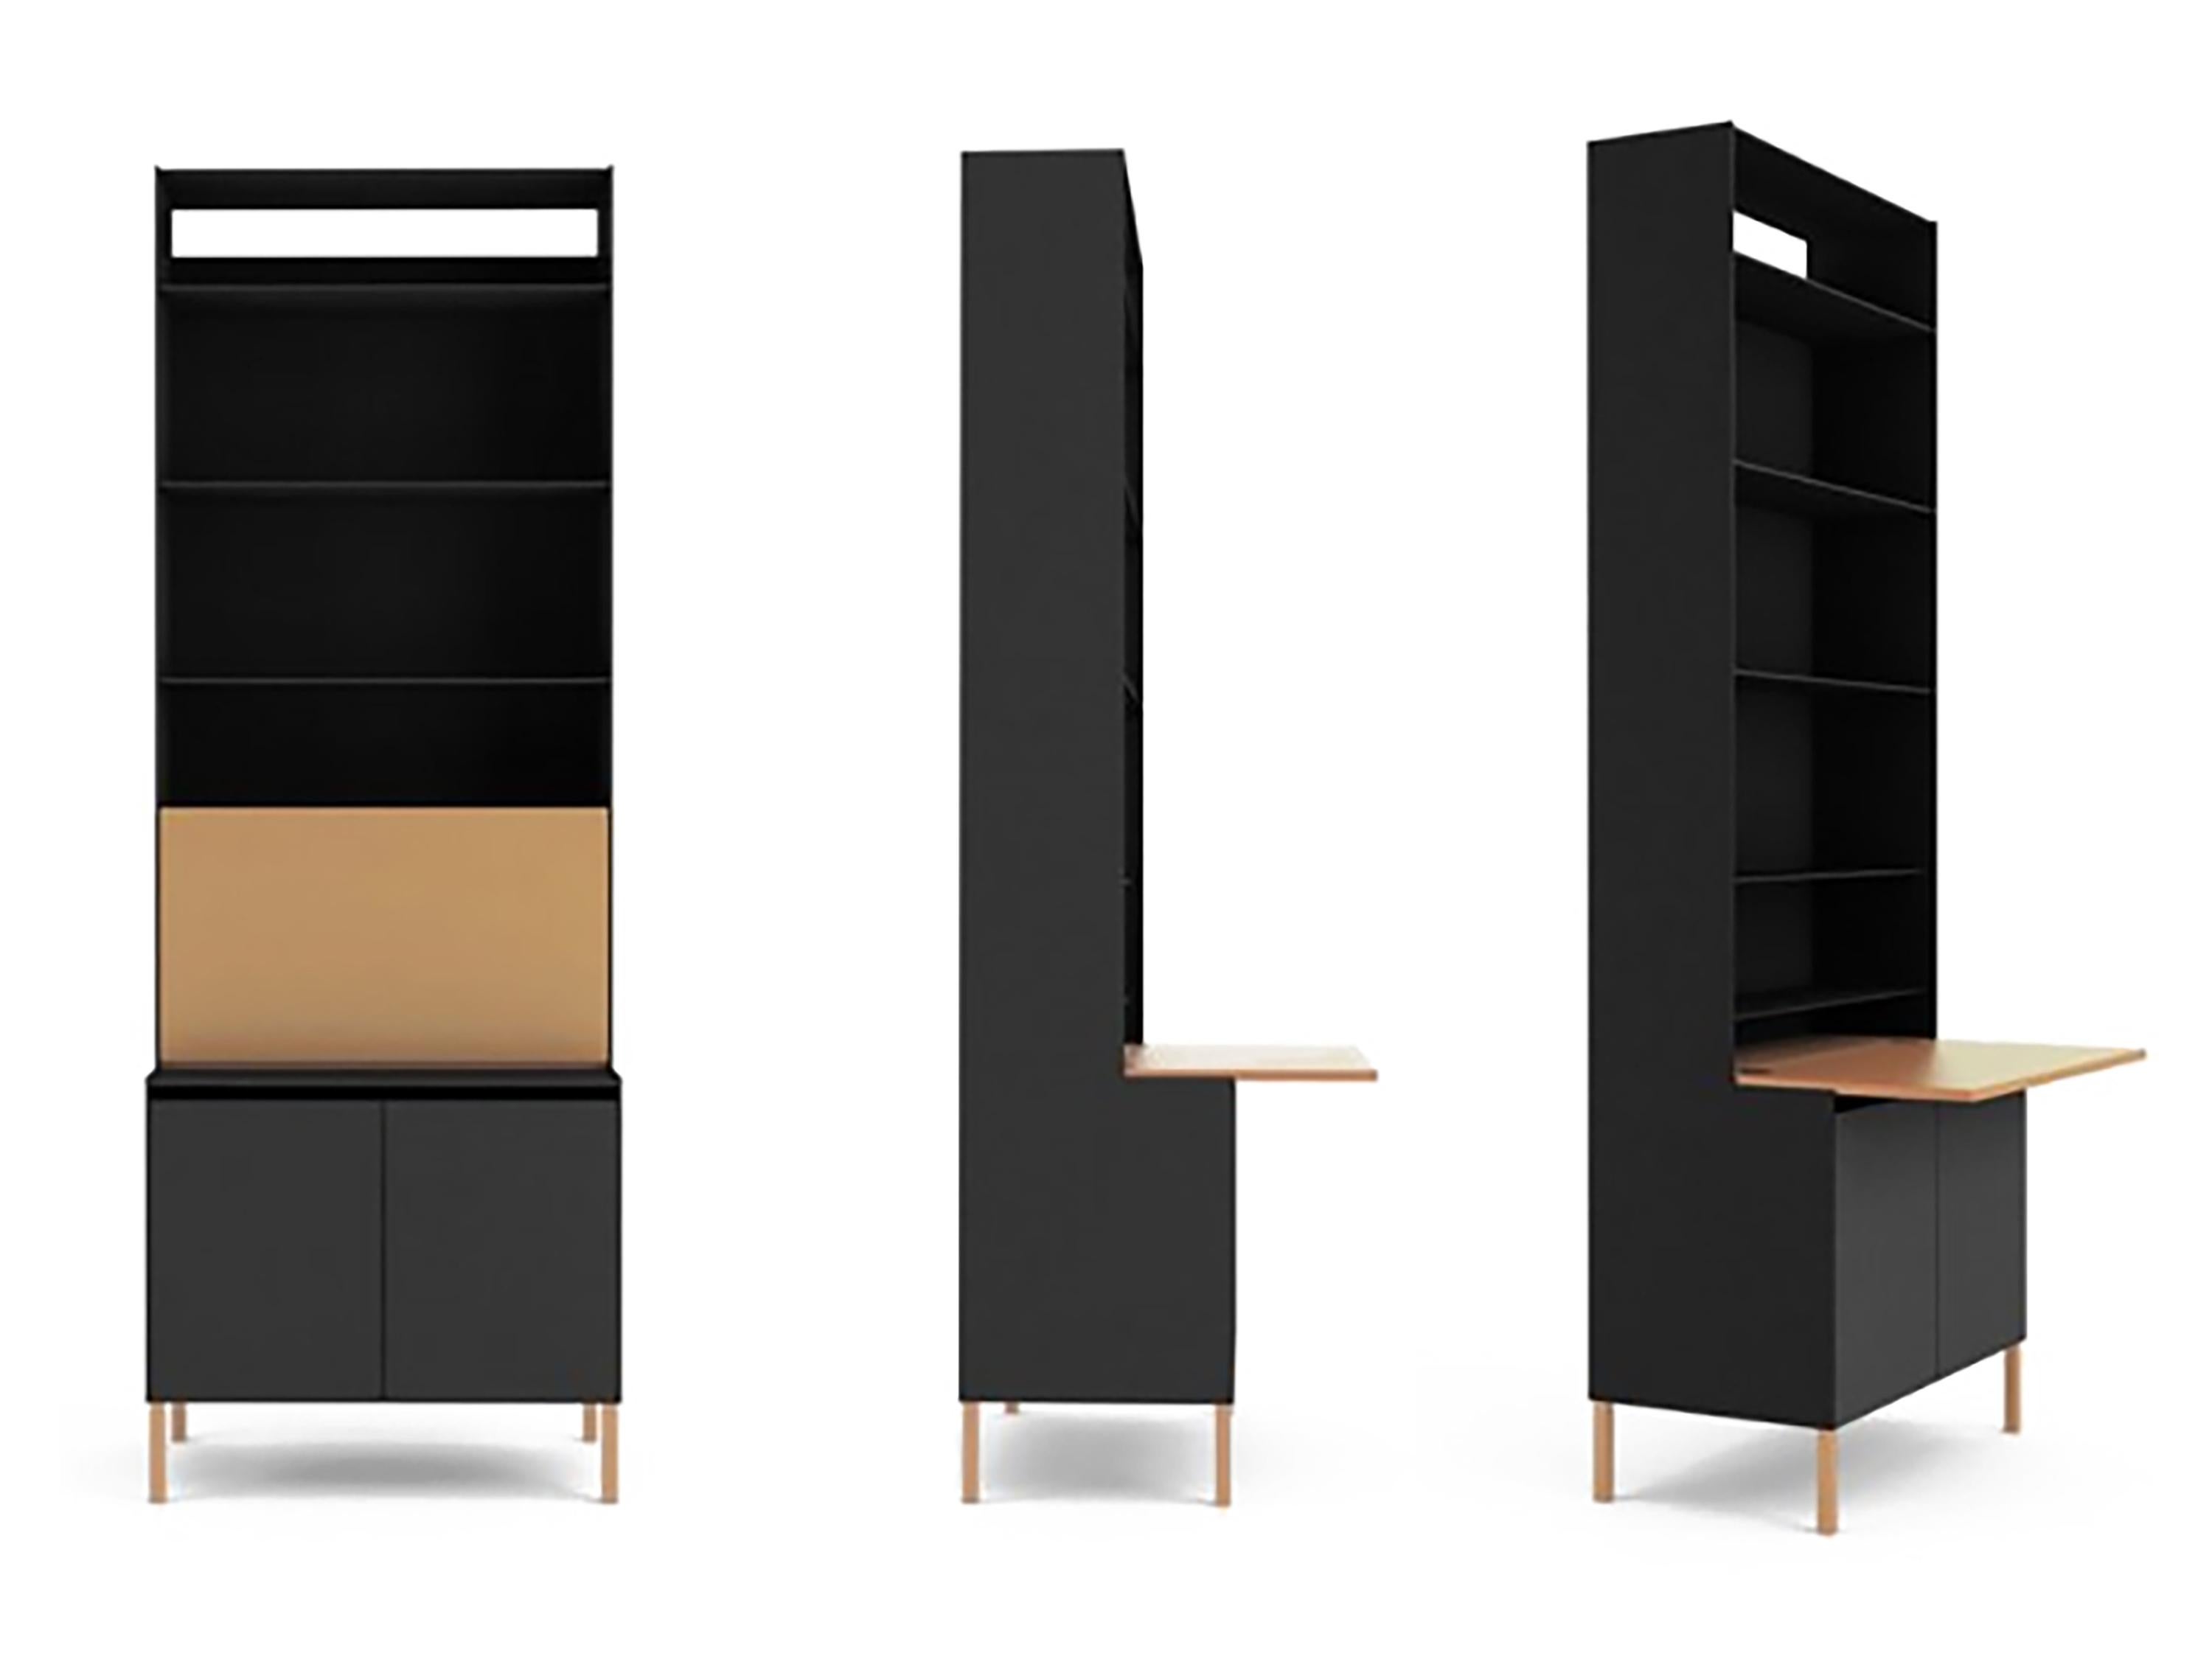 The Secretary: Designed by American industrial and furniture designer Jonathan Nesci, and is made of powder-coated aluminum, steel, and leather.

___

This is a beautifully built, minimal modern, secretary/bookcase that has substantial height,